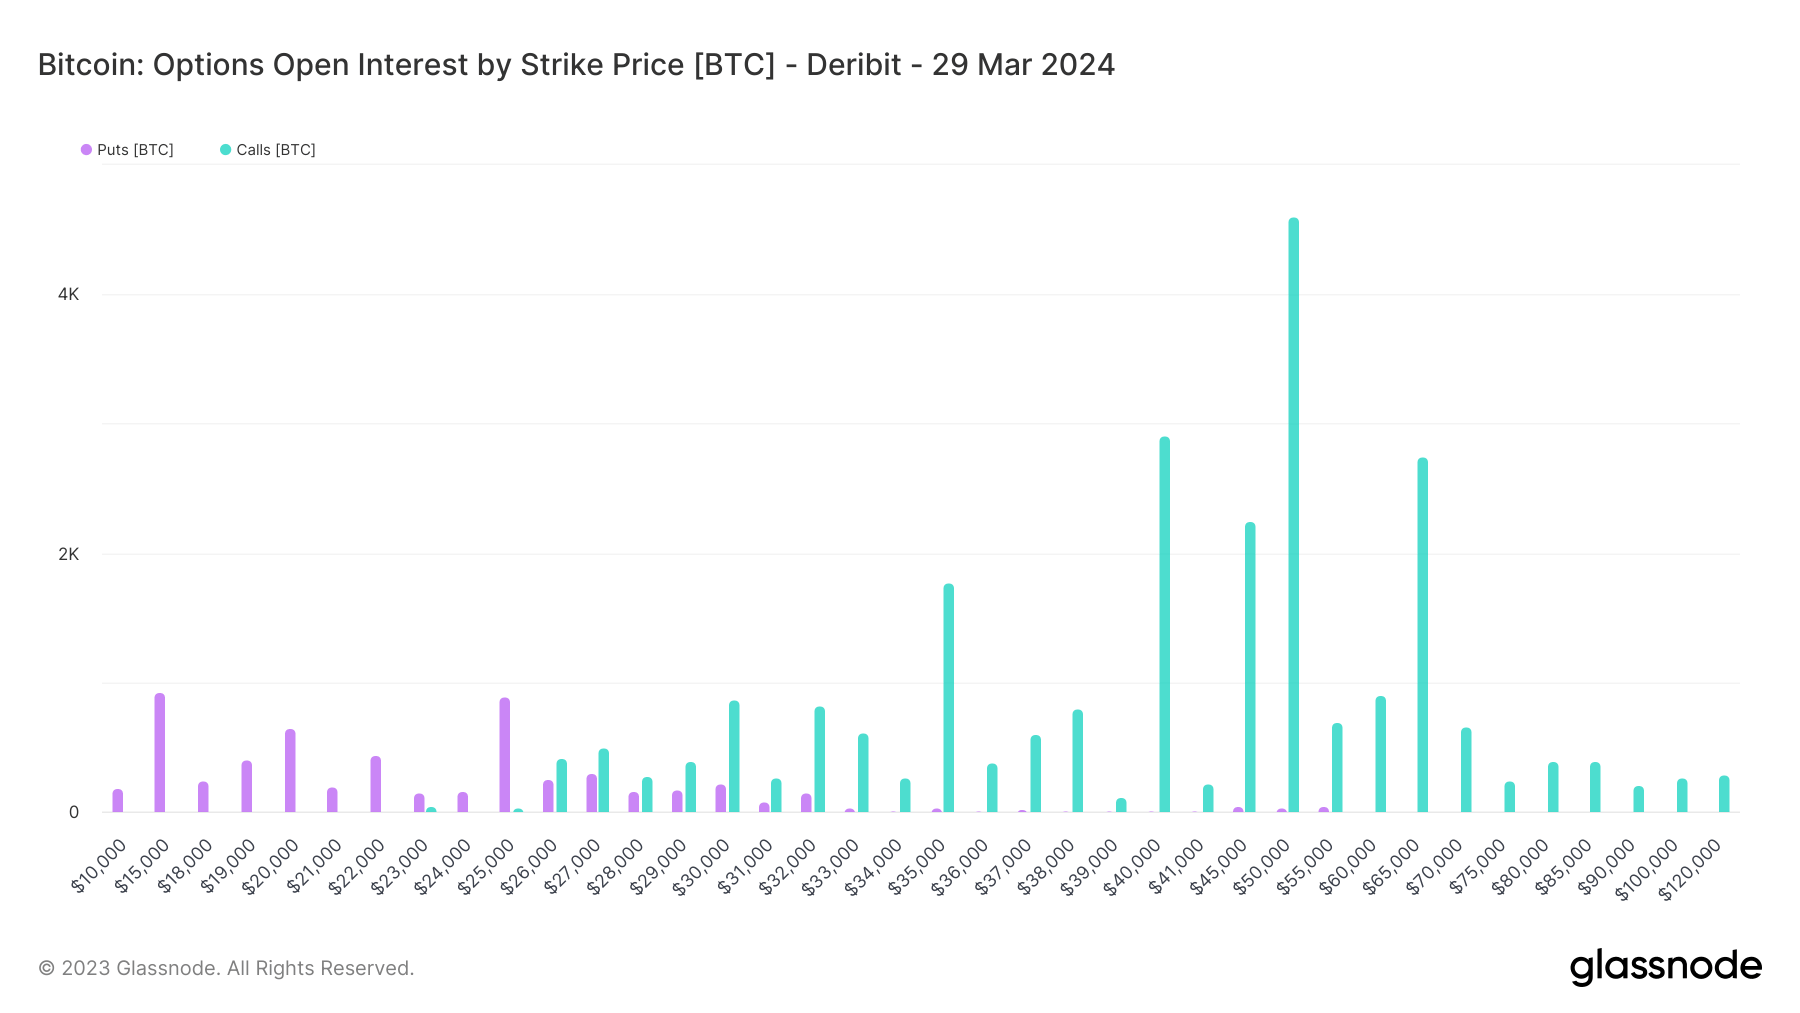 Options open interest by strike price – March 29, 2024: (Source: Glassnode)